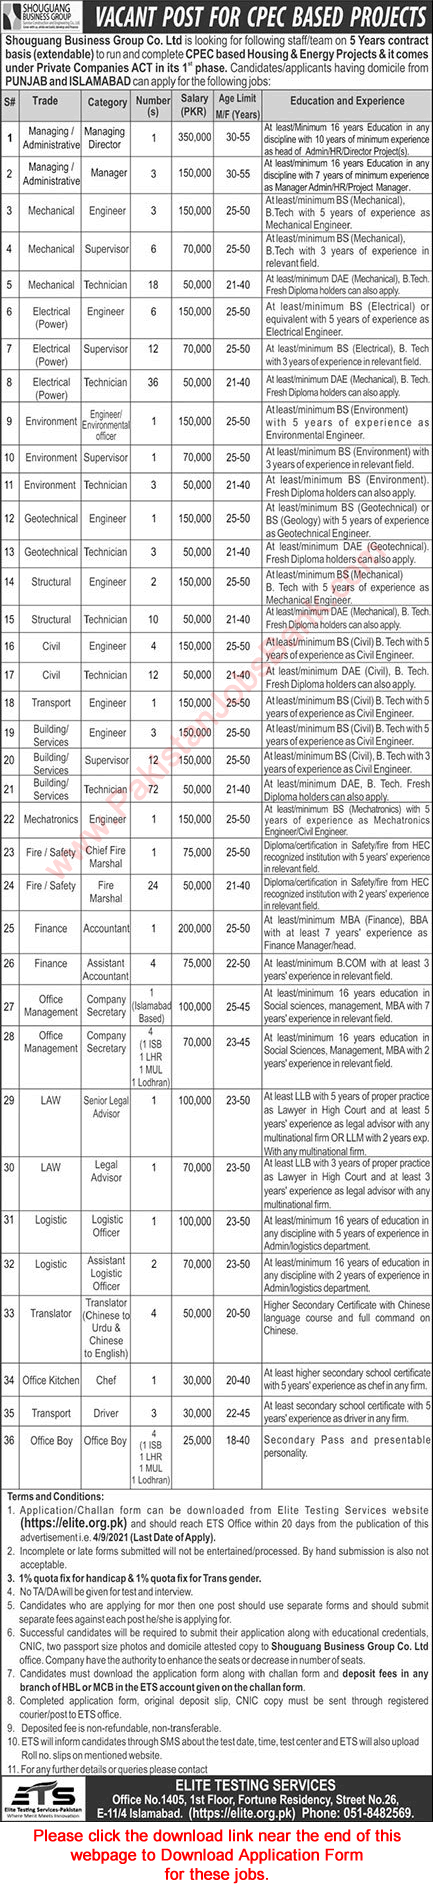 Shouguang Business Group Jobs 2021 August ETS Application Form CPEC Based Project Latest